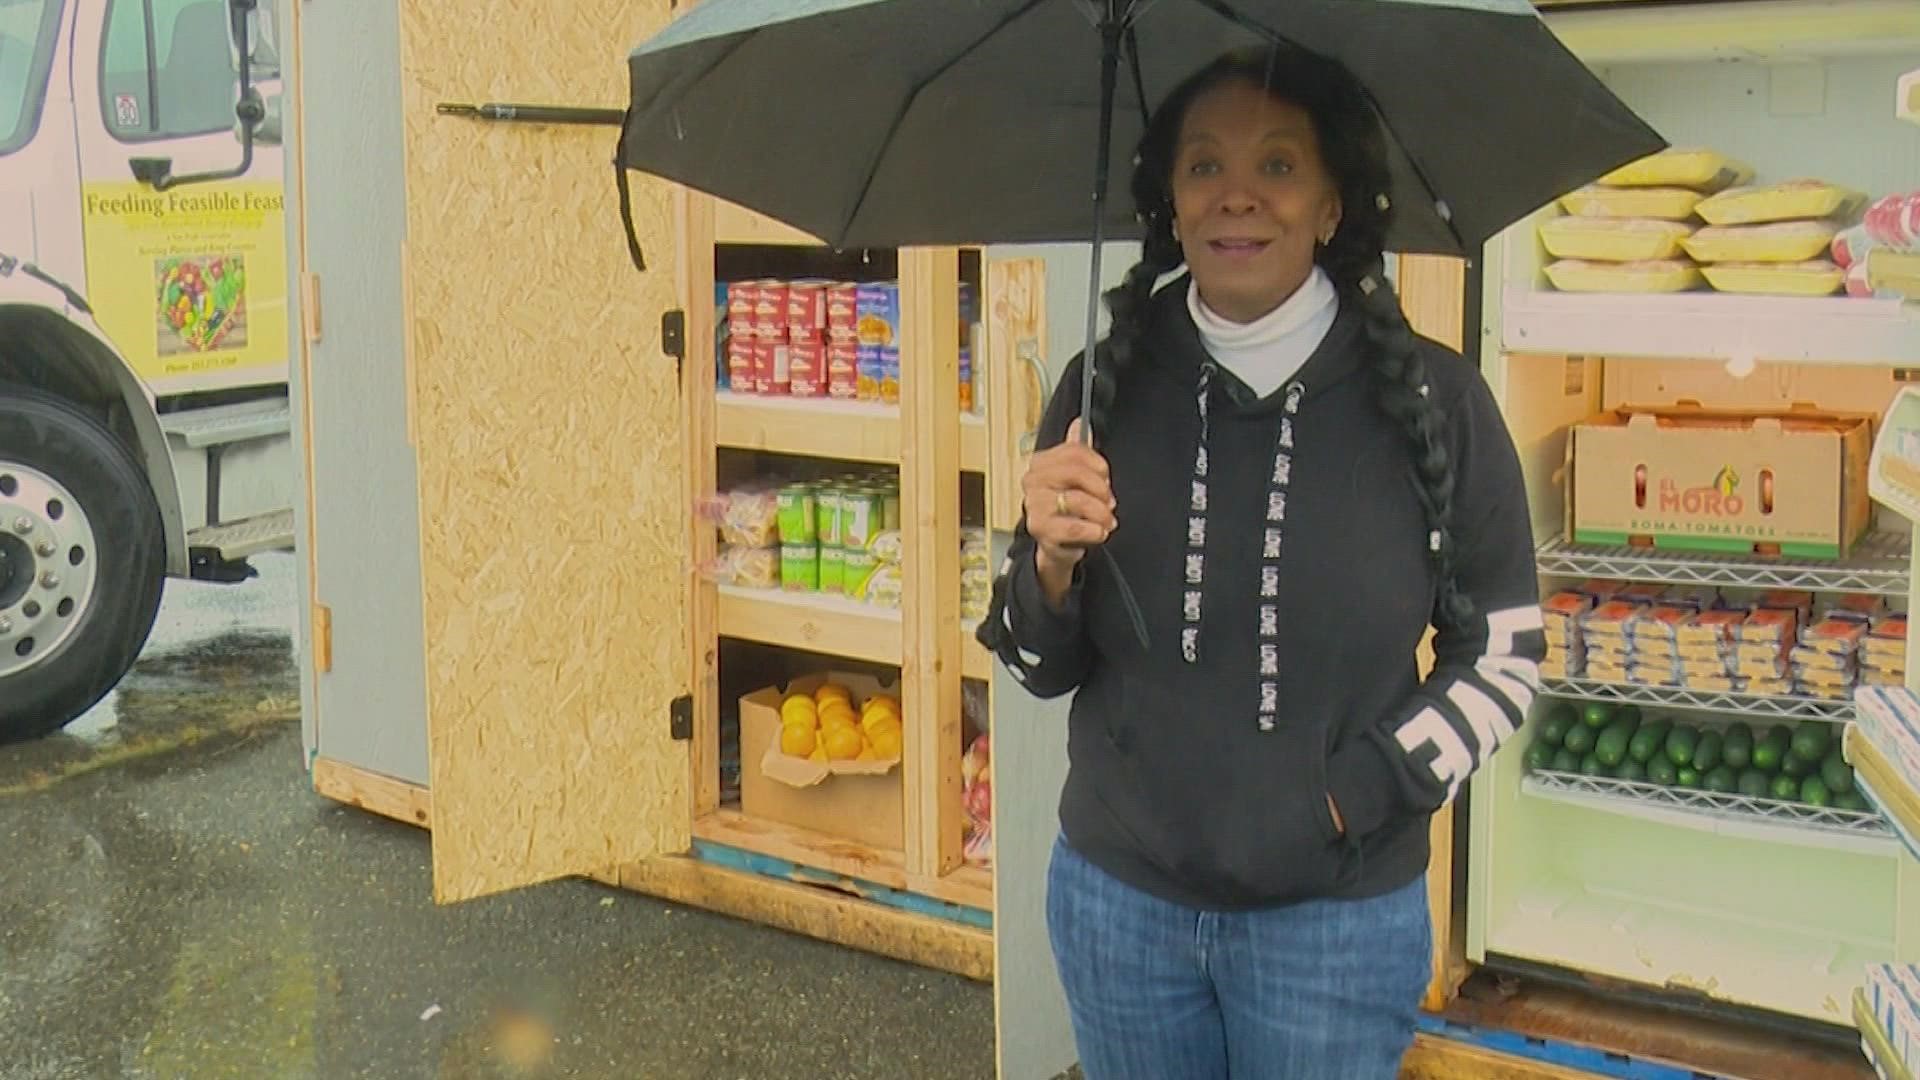 Throughout Pierce and King counties, one woman is working to make sure people feel comfortable and dignified when the receive food assistance.